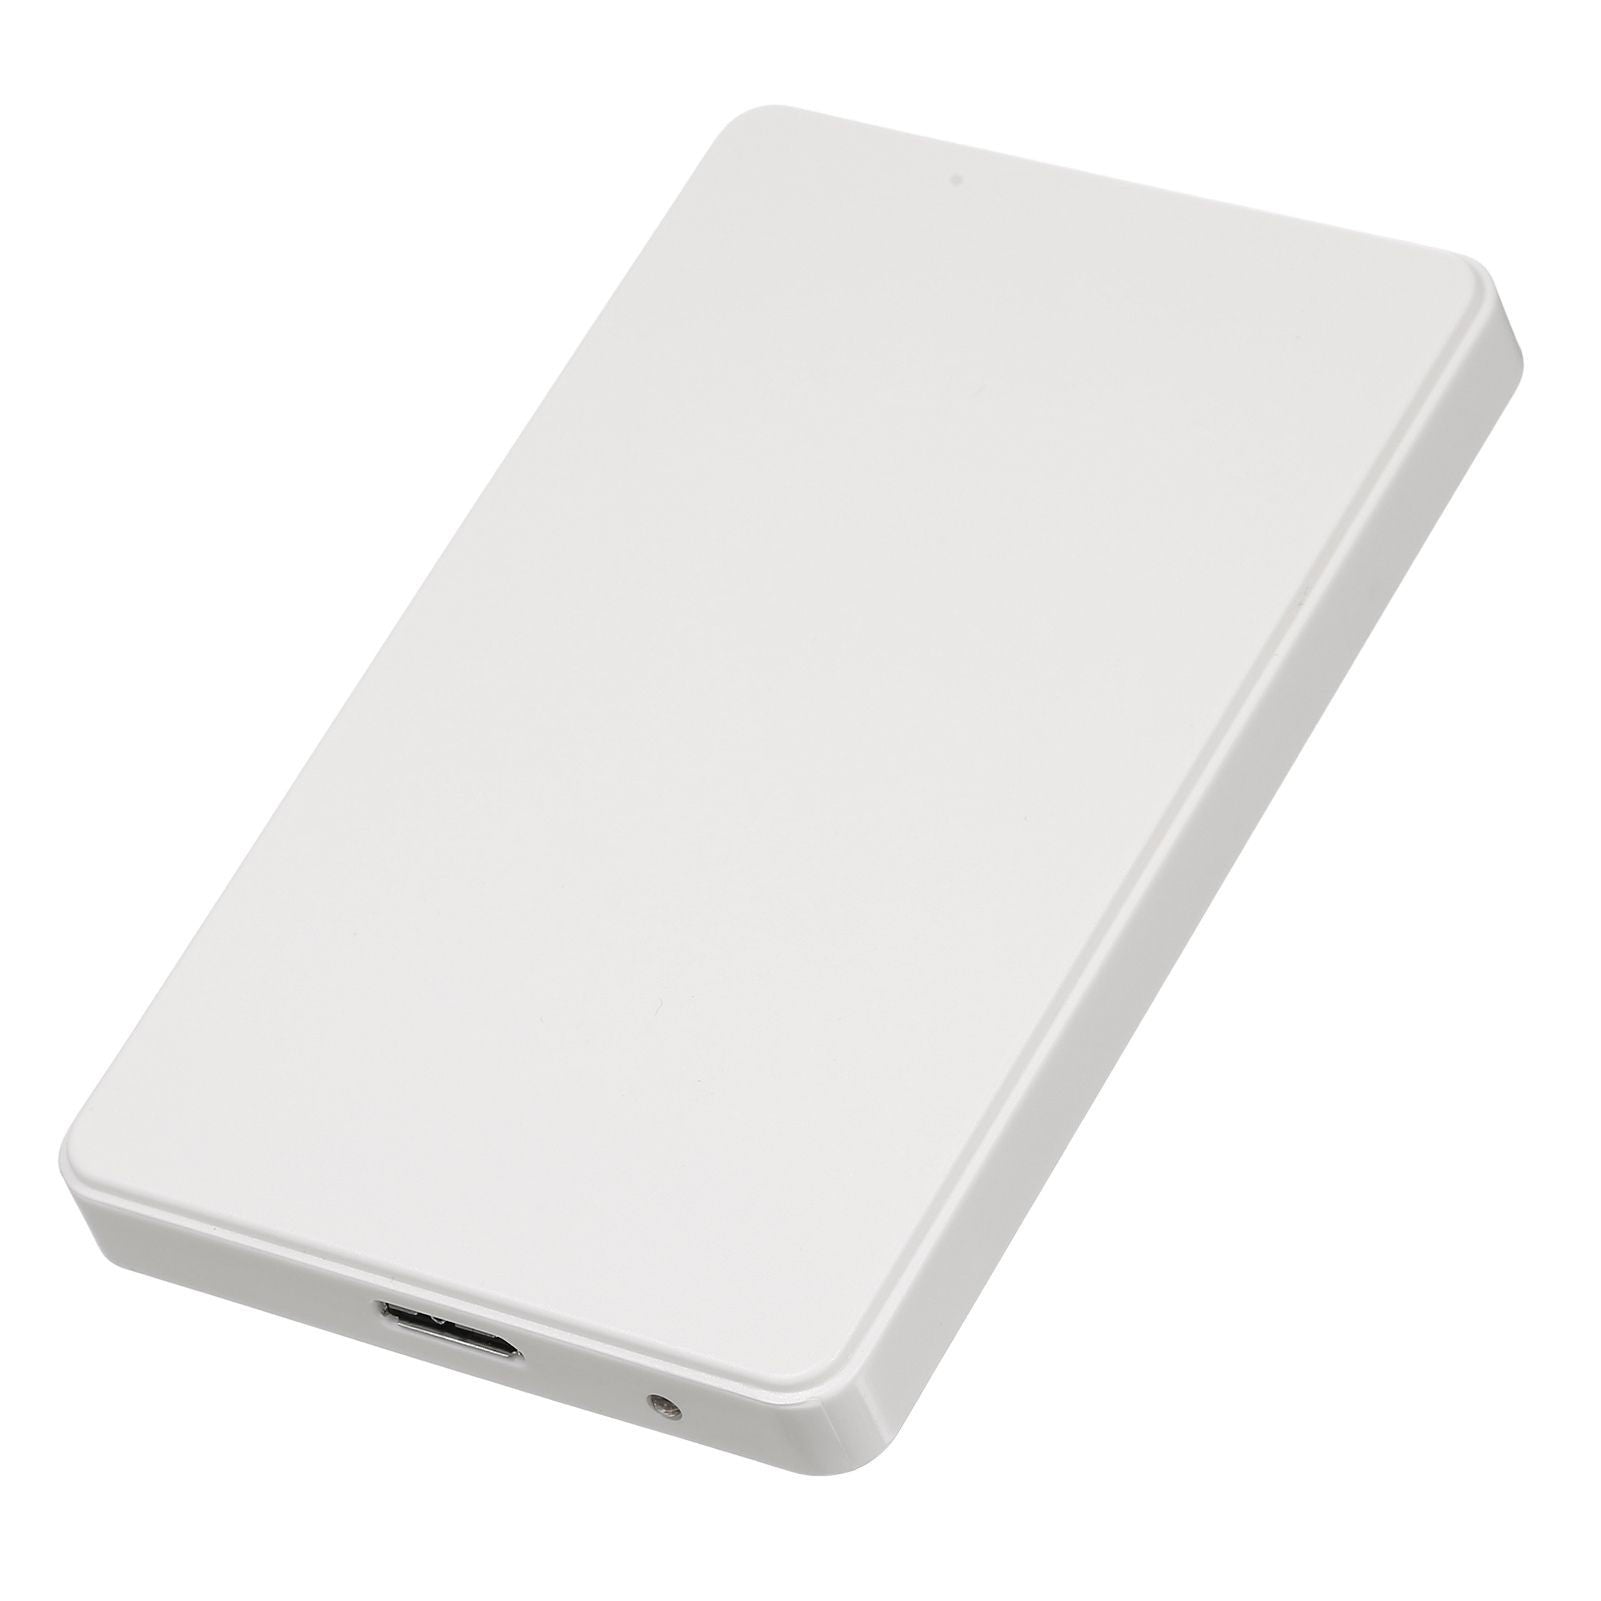 2.5 inch Hard Disk Case USB3.0 High-speed 5Gpbs Transmission External Enclosure SATA Hard Drive Case Support 2.5inch 7/9.5mm SATA HDD/SSD - White